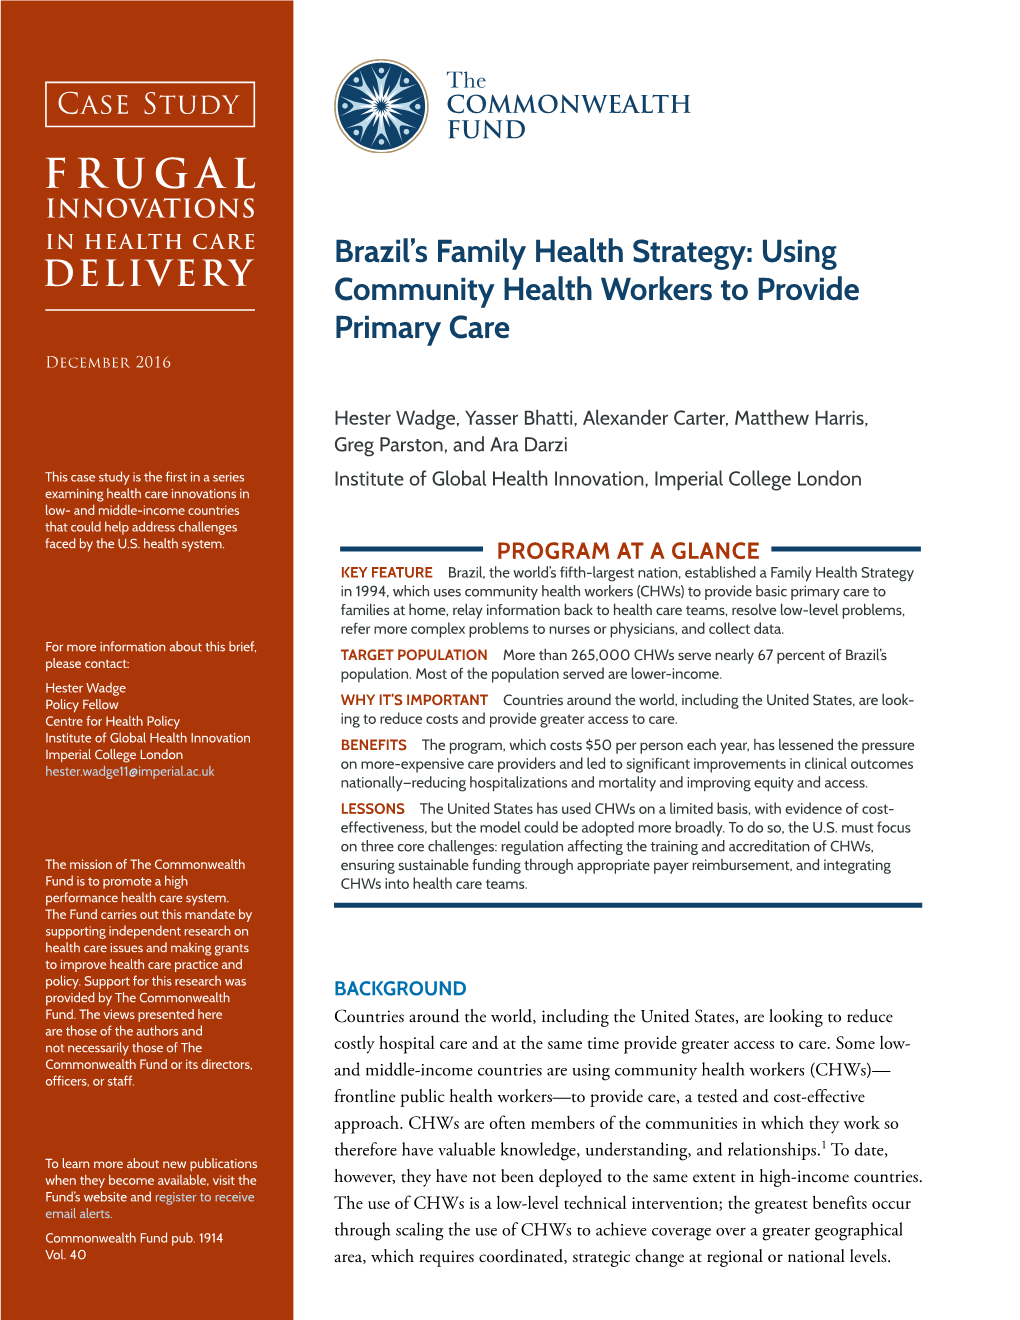 Using Community Health Workers to Provide Primary Care